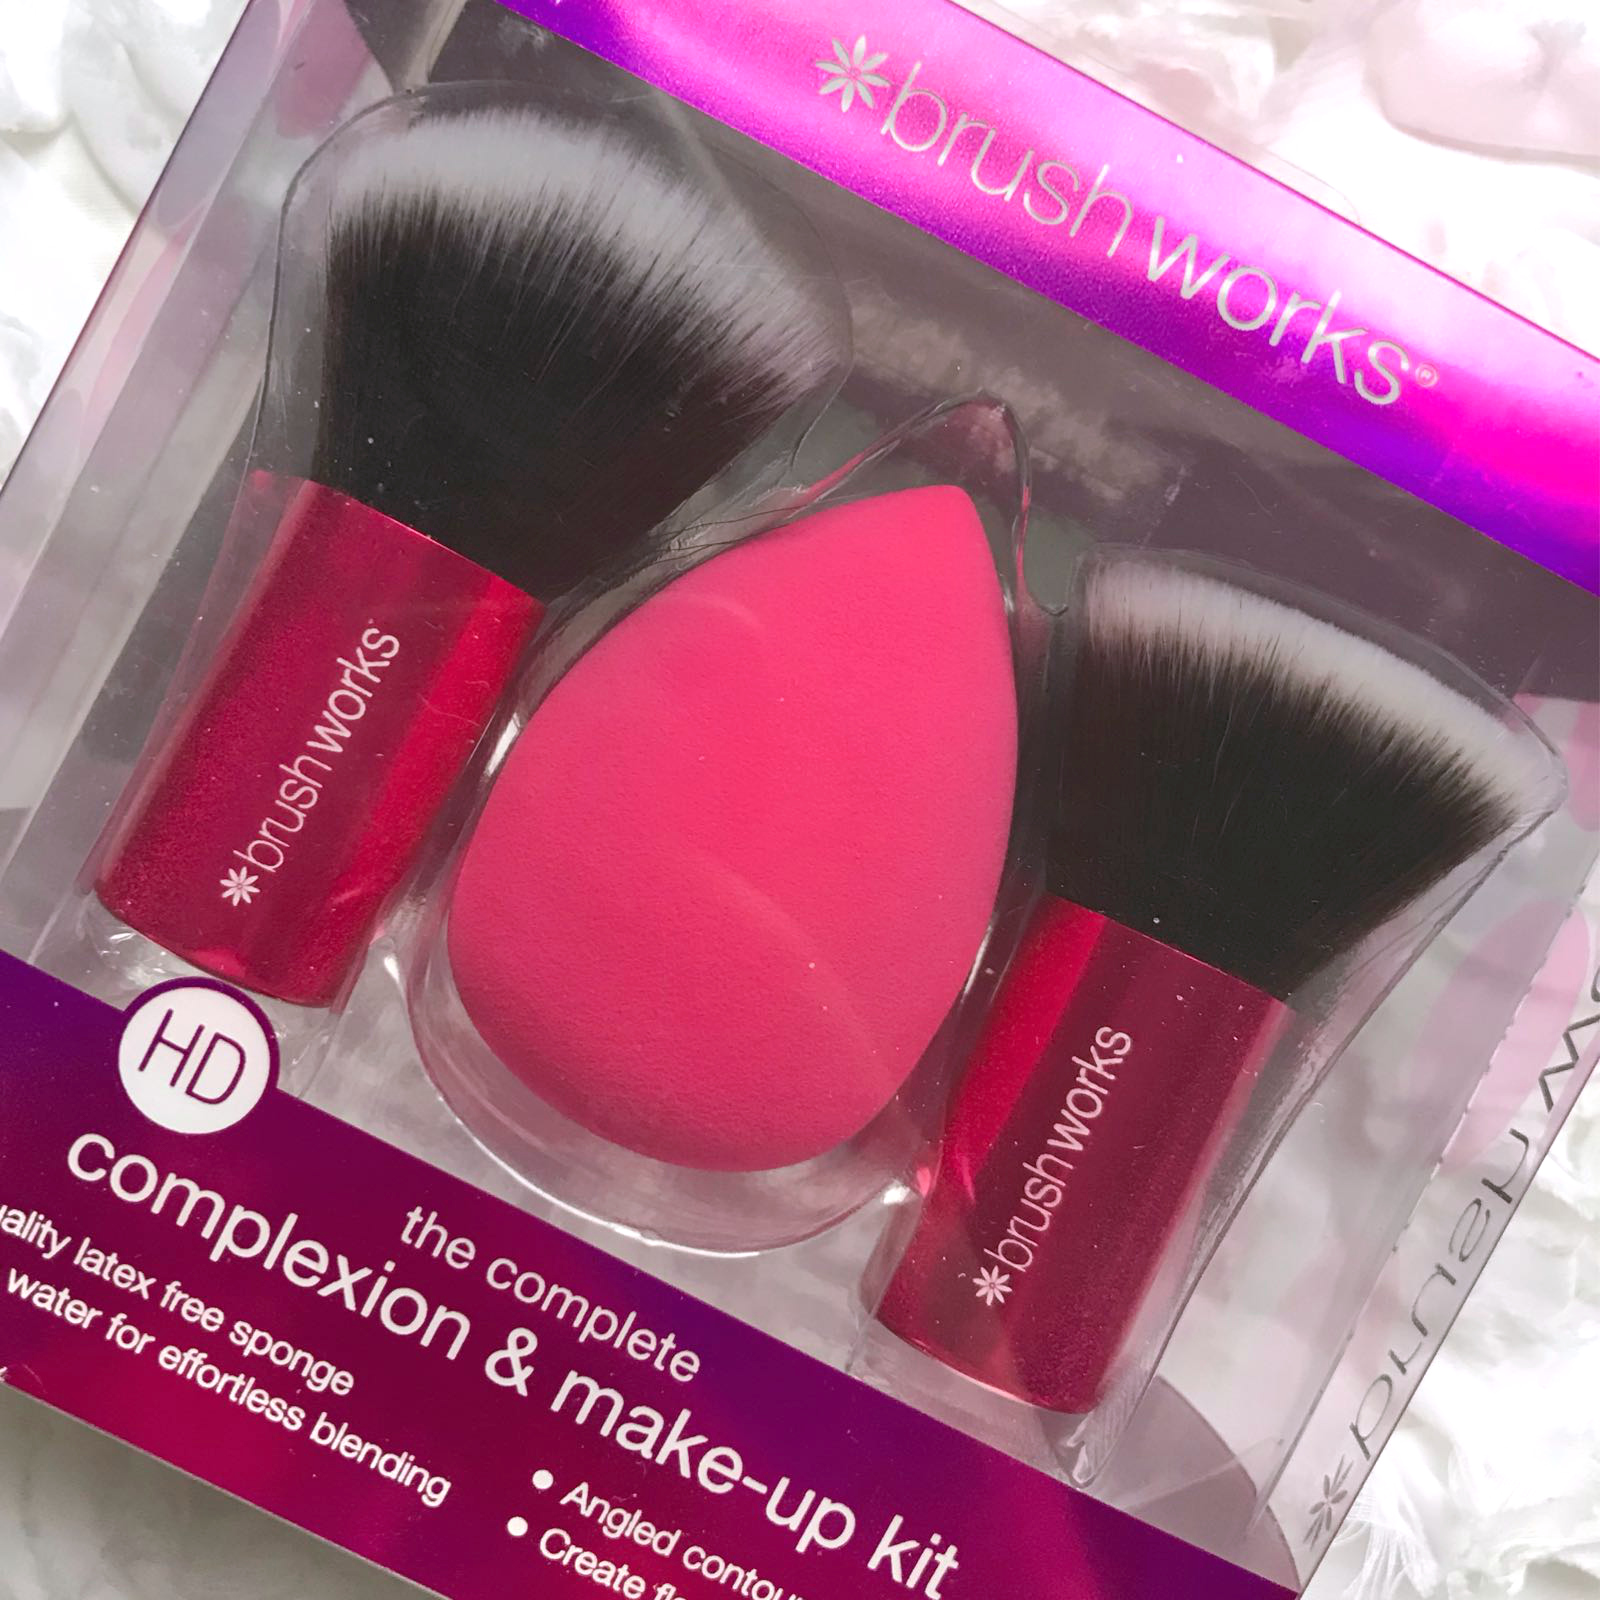 Brushworks Complexion And Makeup Kit - Mammaful Zo: Beauty, Fashion ...